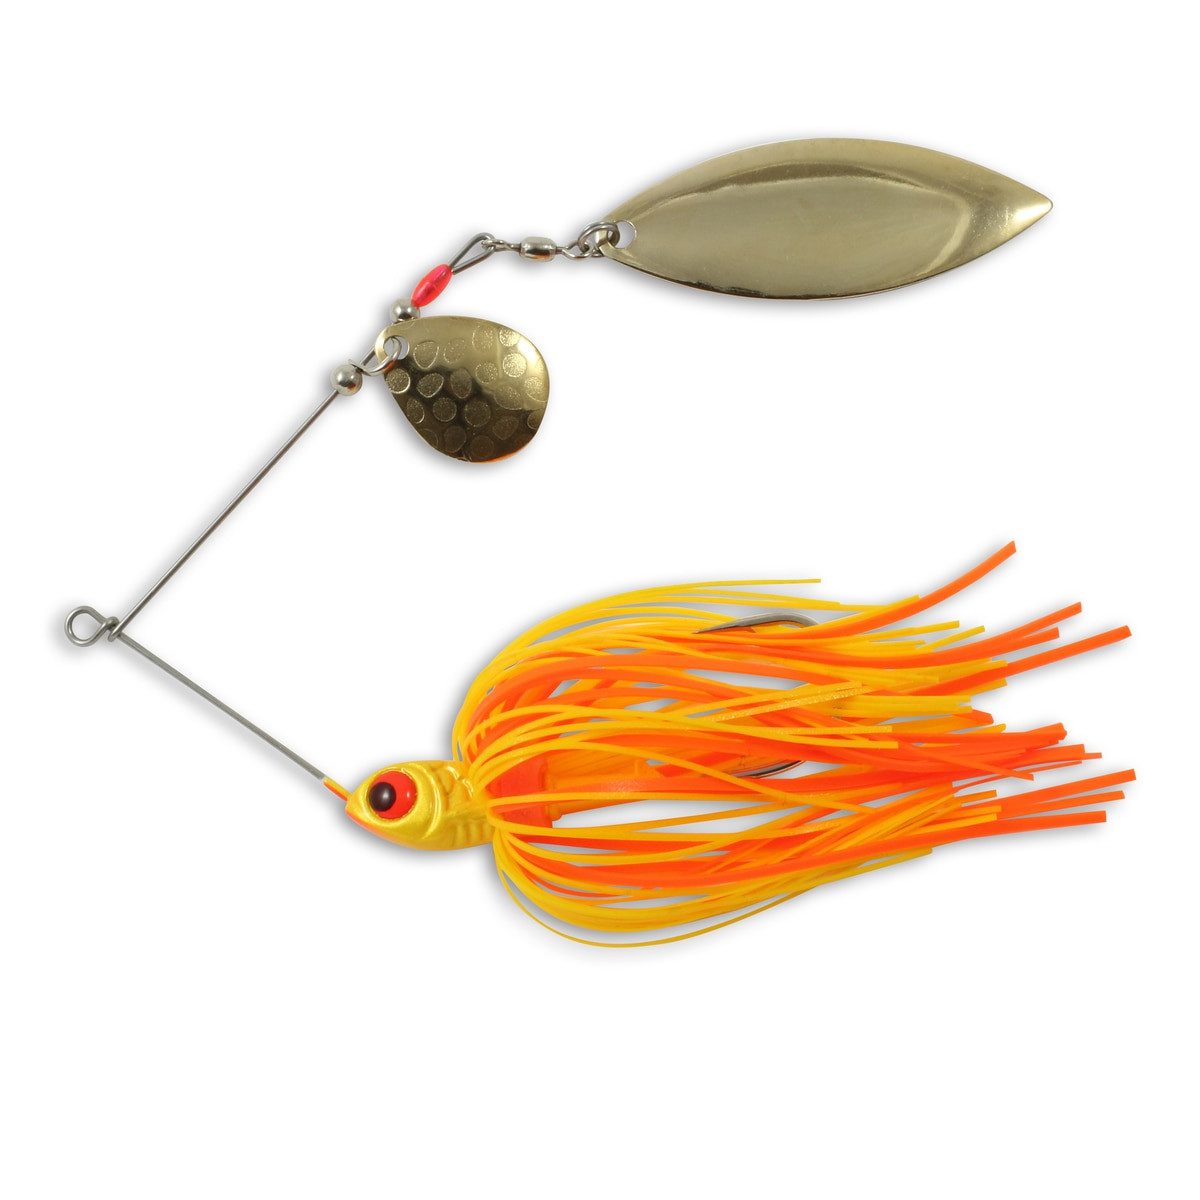 Buy fishing spinners Online in Philippines at Low Prices at desertcart